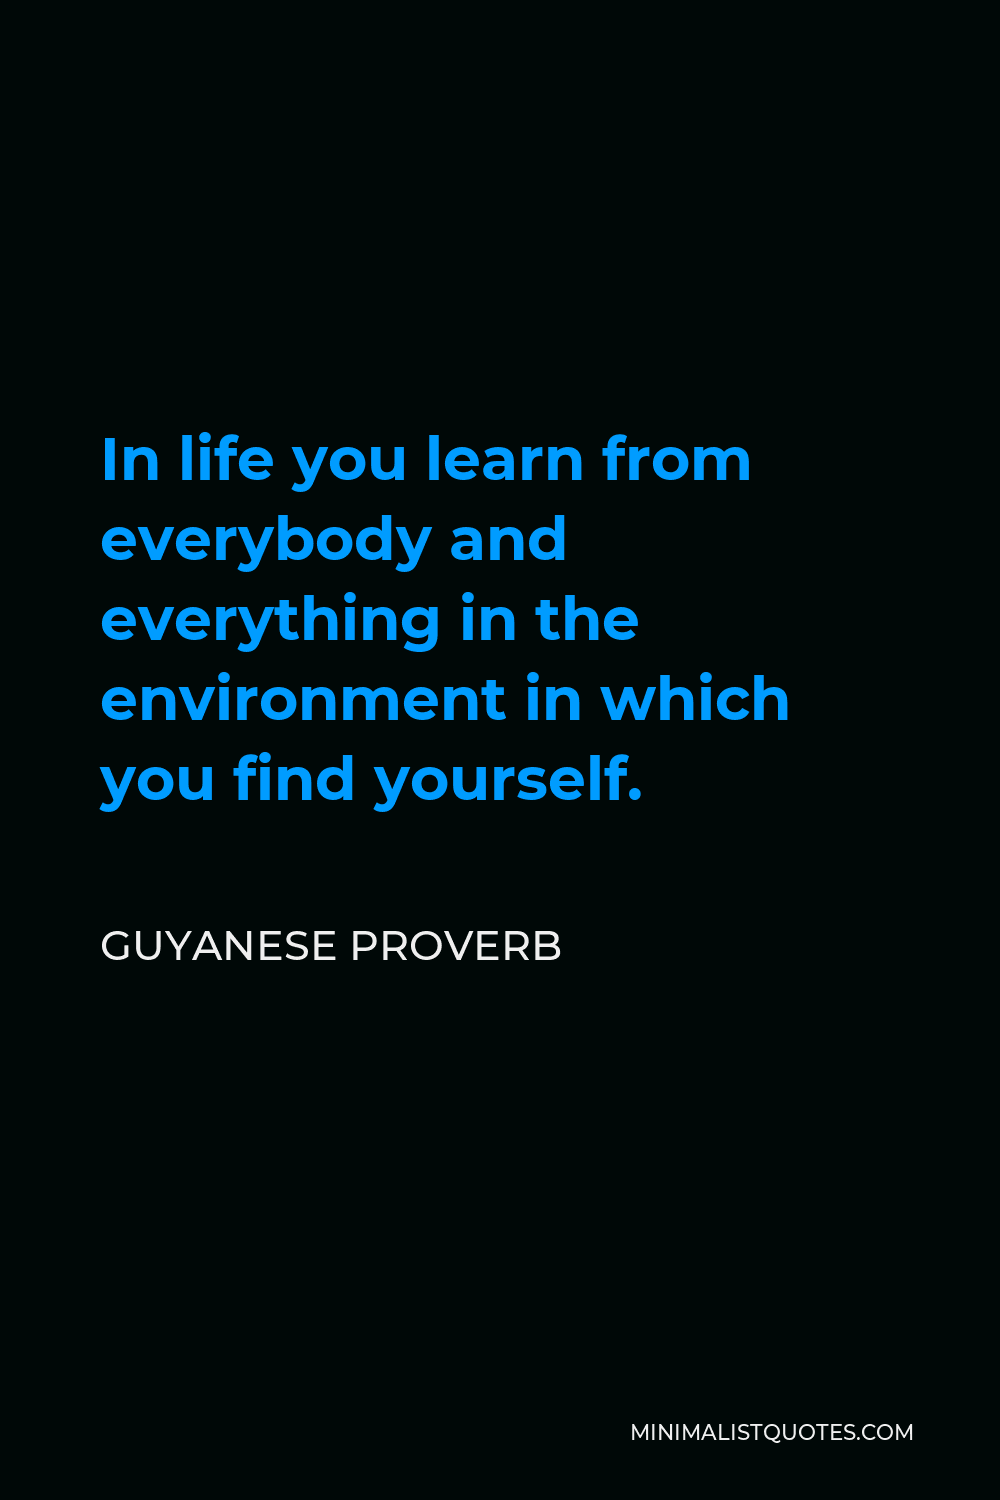 Guyanese Proverb Quote - In life you learn from everybody and everything in the environment in which you find yourself.